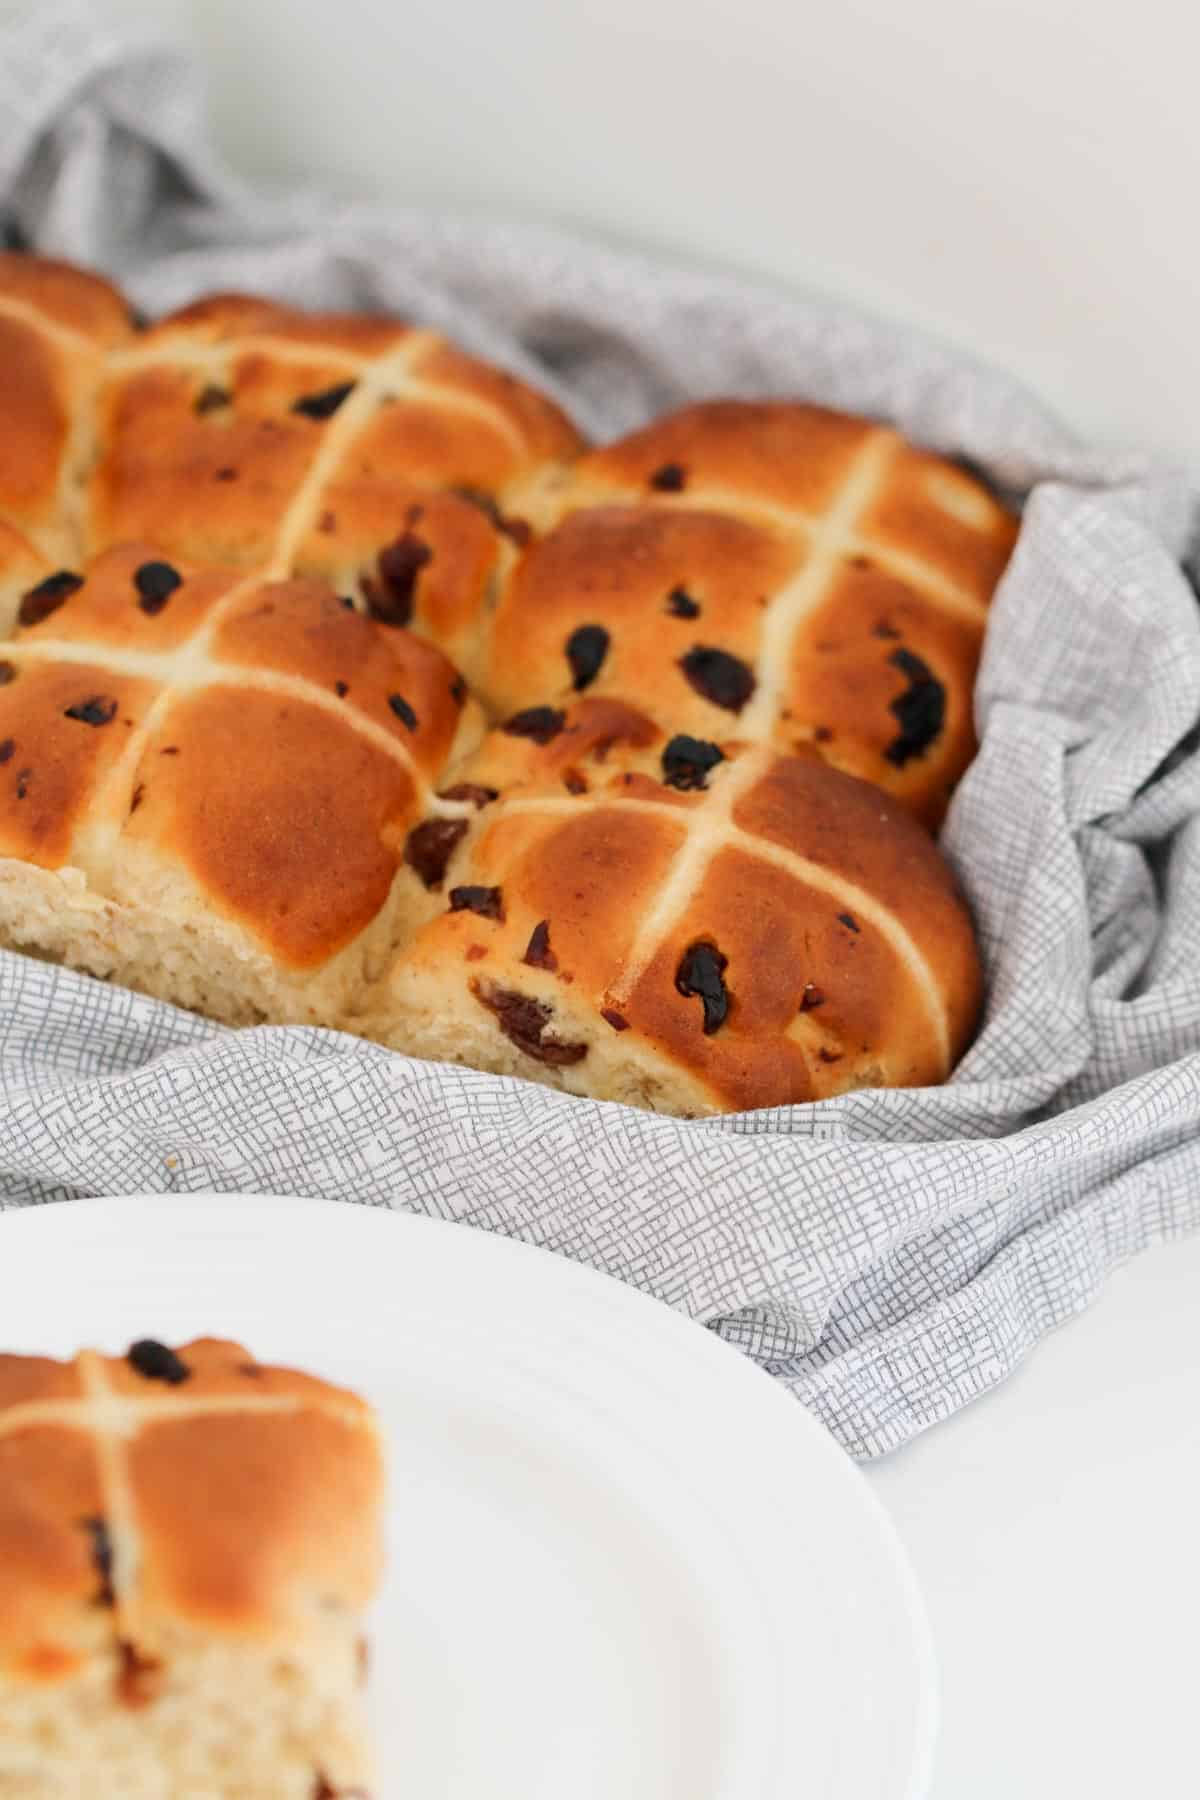 White crossed piped on to fruit hot cross buns.